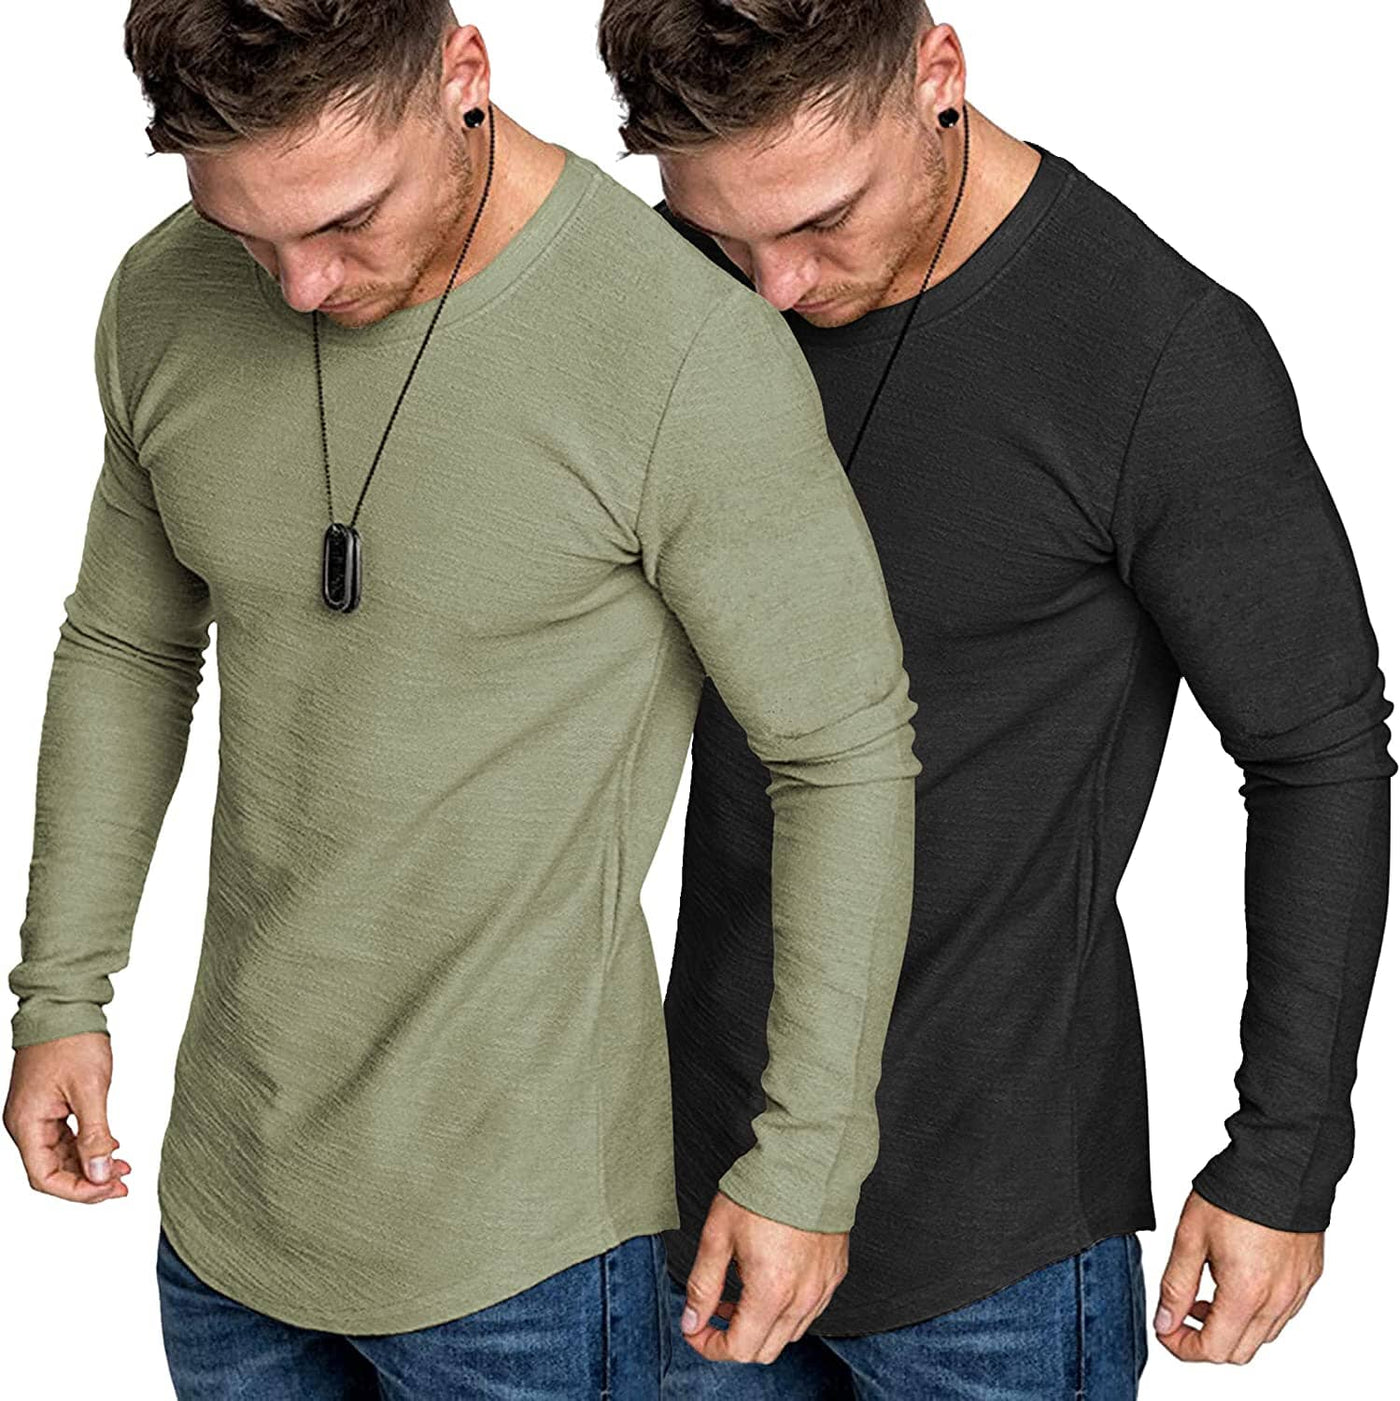 2-Pack Muscle Fitted Workout T-Shirt (US Only) T-Shirt COOFANDY Store Black/Light Army Green S 